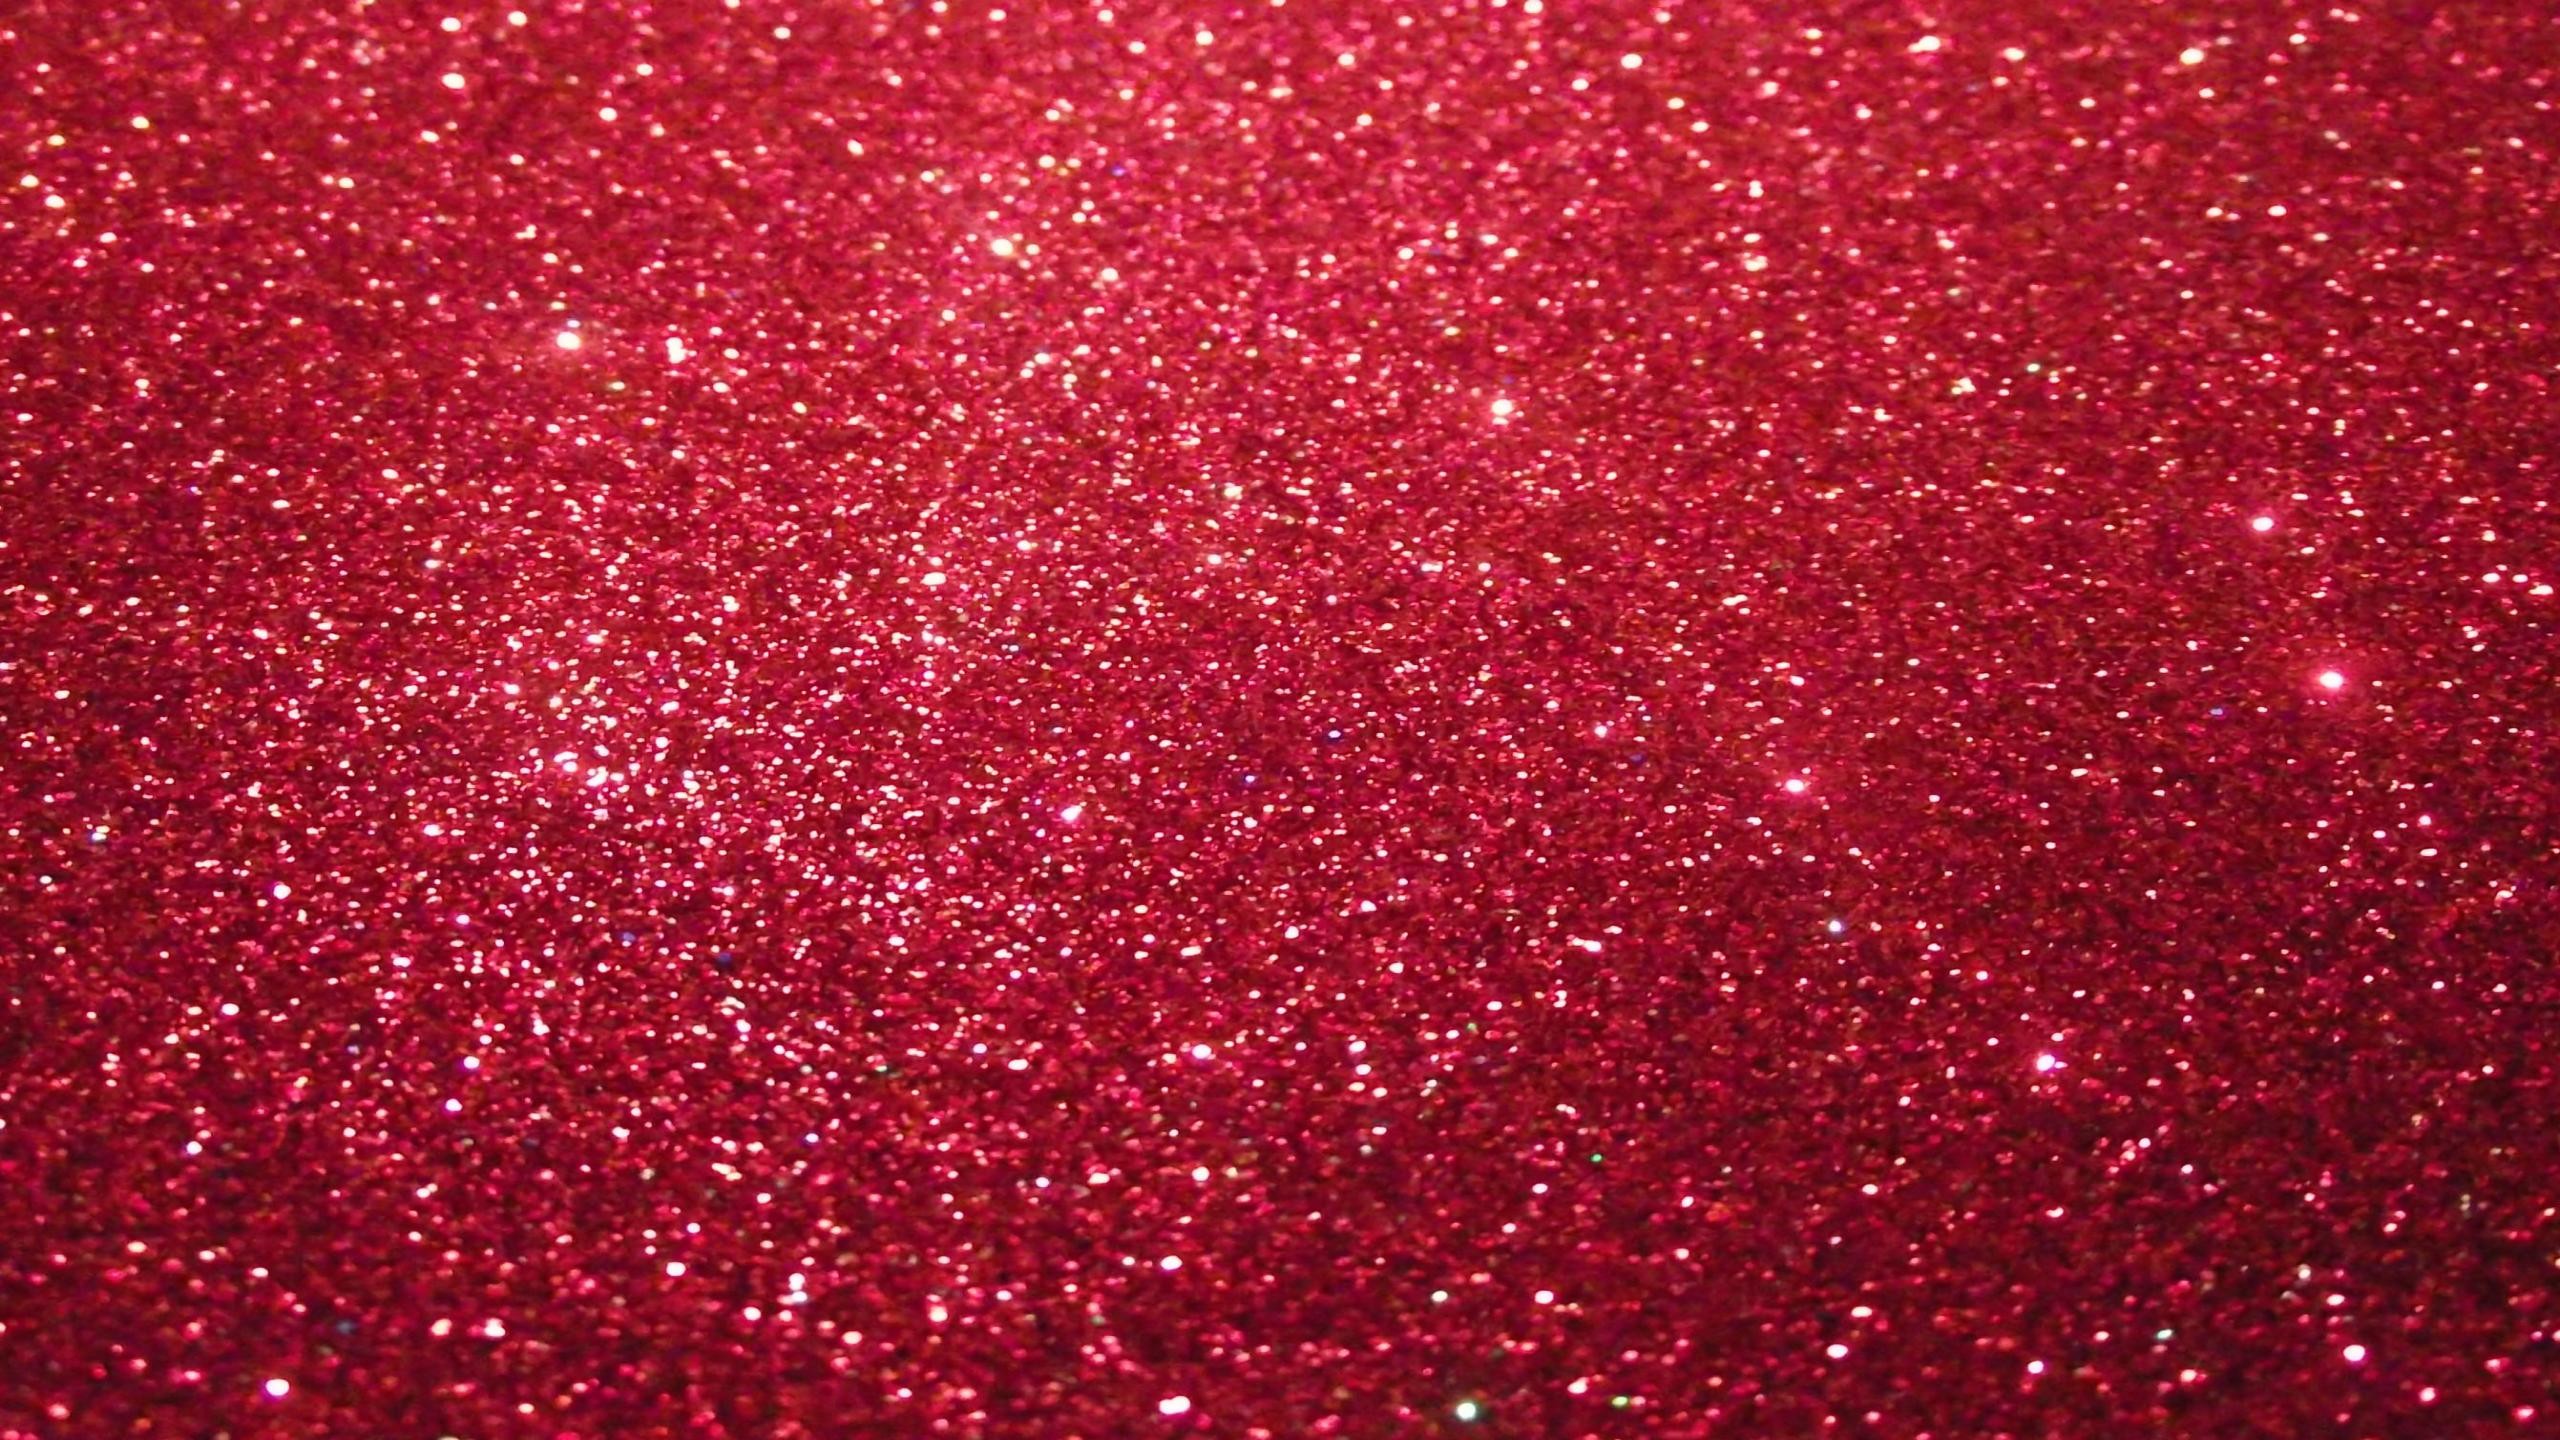 2560x1440 red glitter backgrounds image size 1024x760px violet glitter .